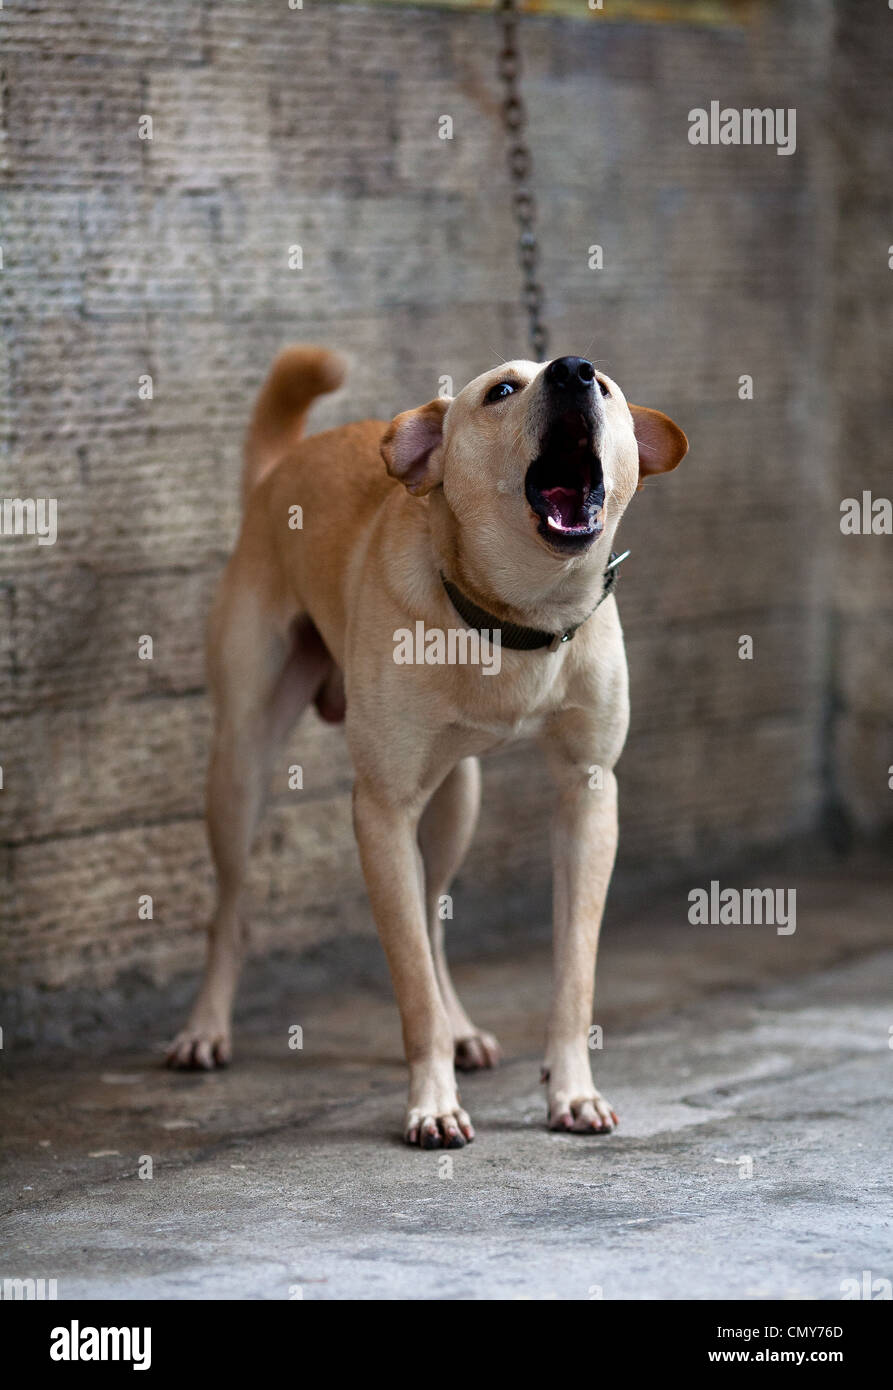 A dog chained to a wall barks outside a home in Antipolo, Rizal Province, Philippines. Stock Photo